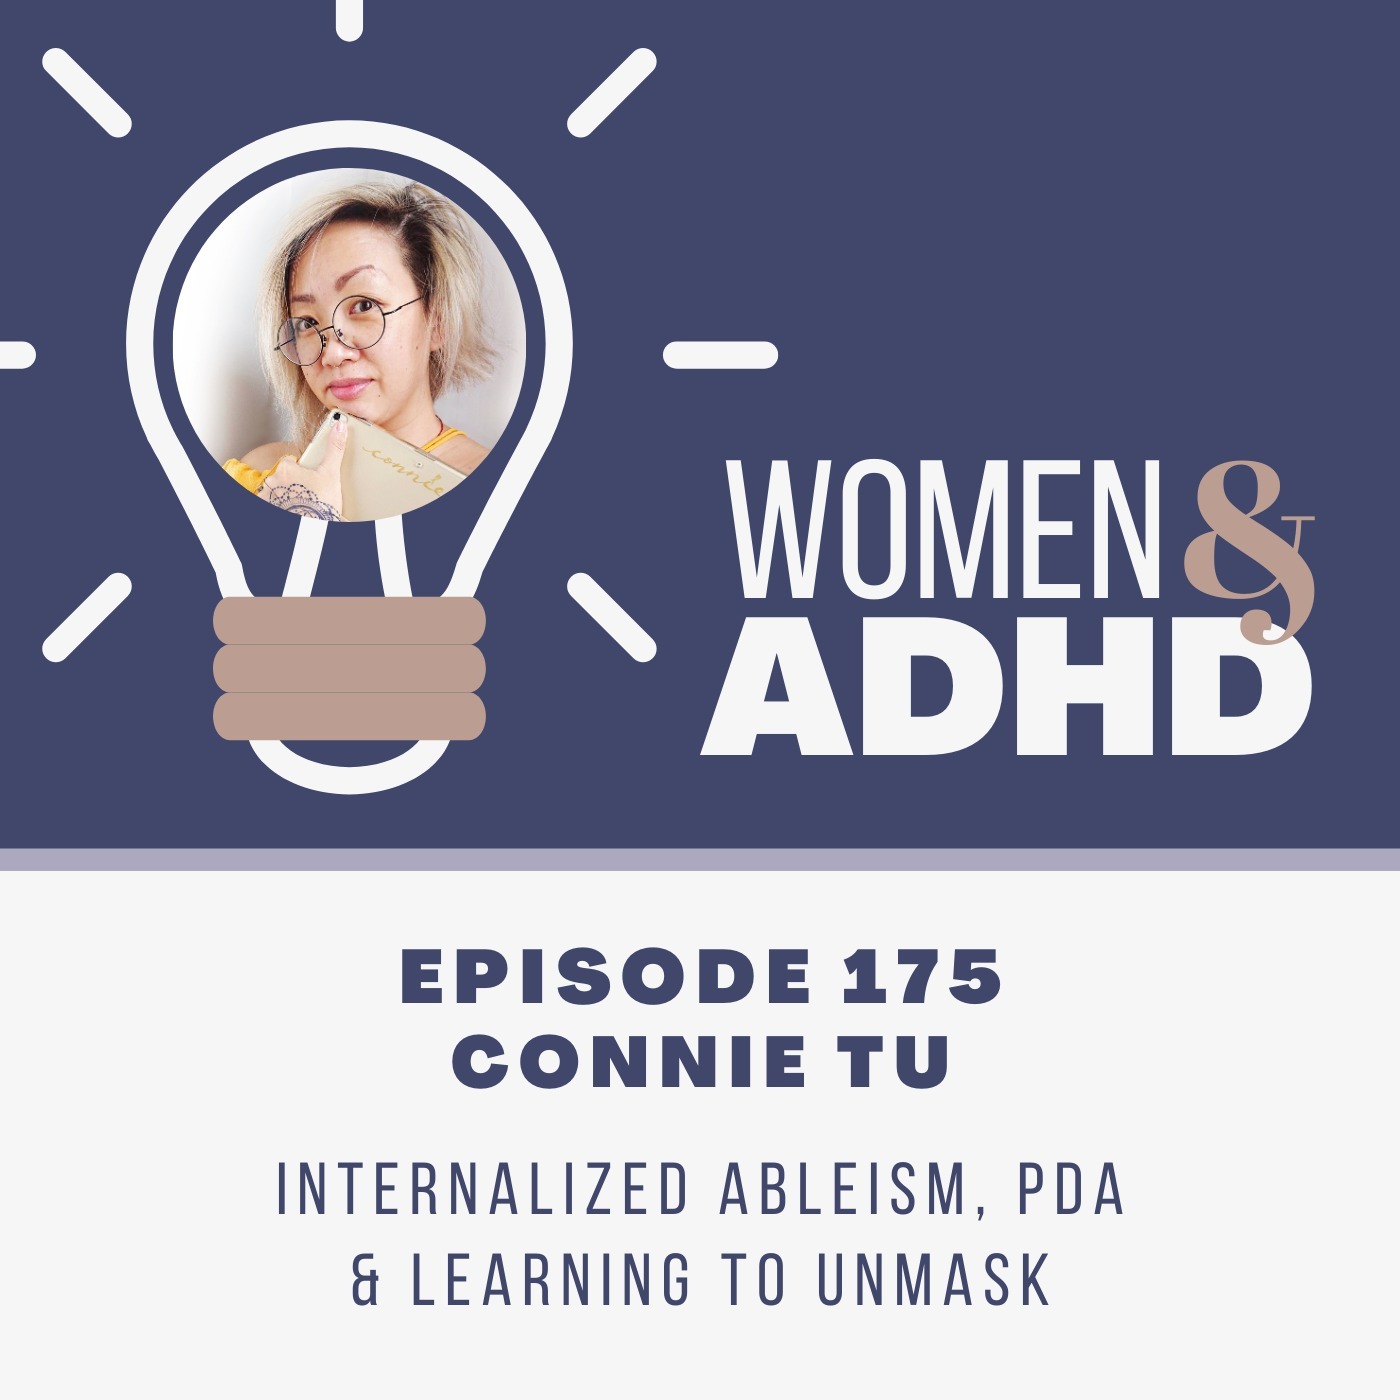 Connie Tu: Internalized ableism, PDA & learning to unmask